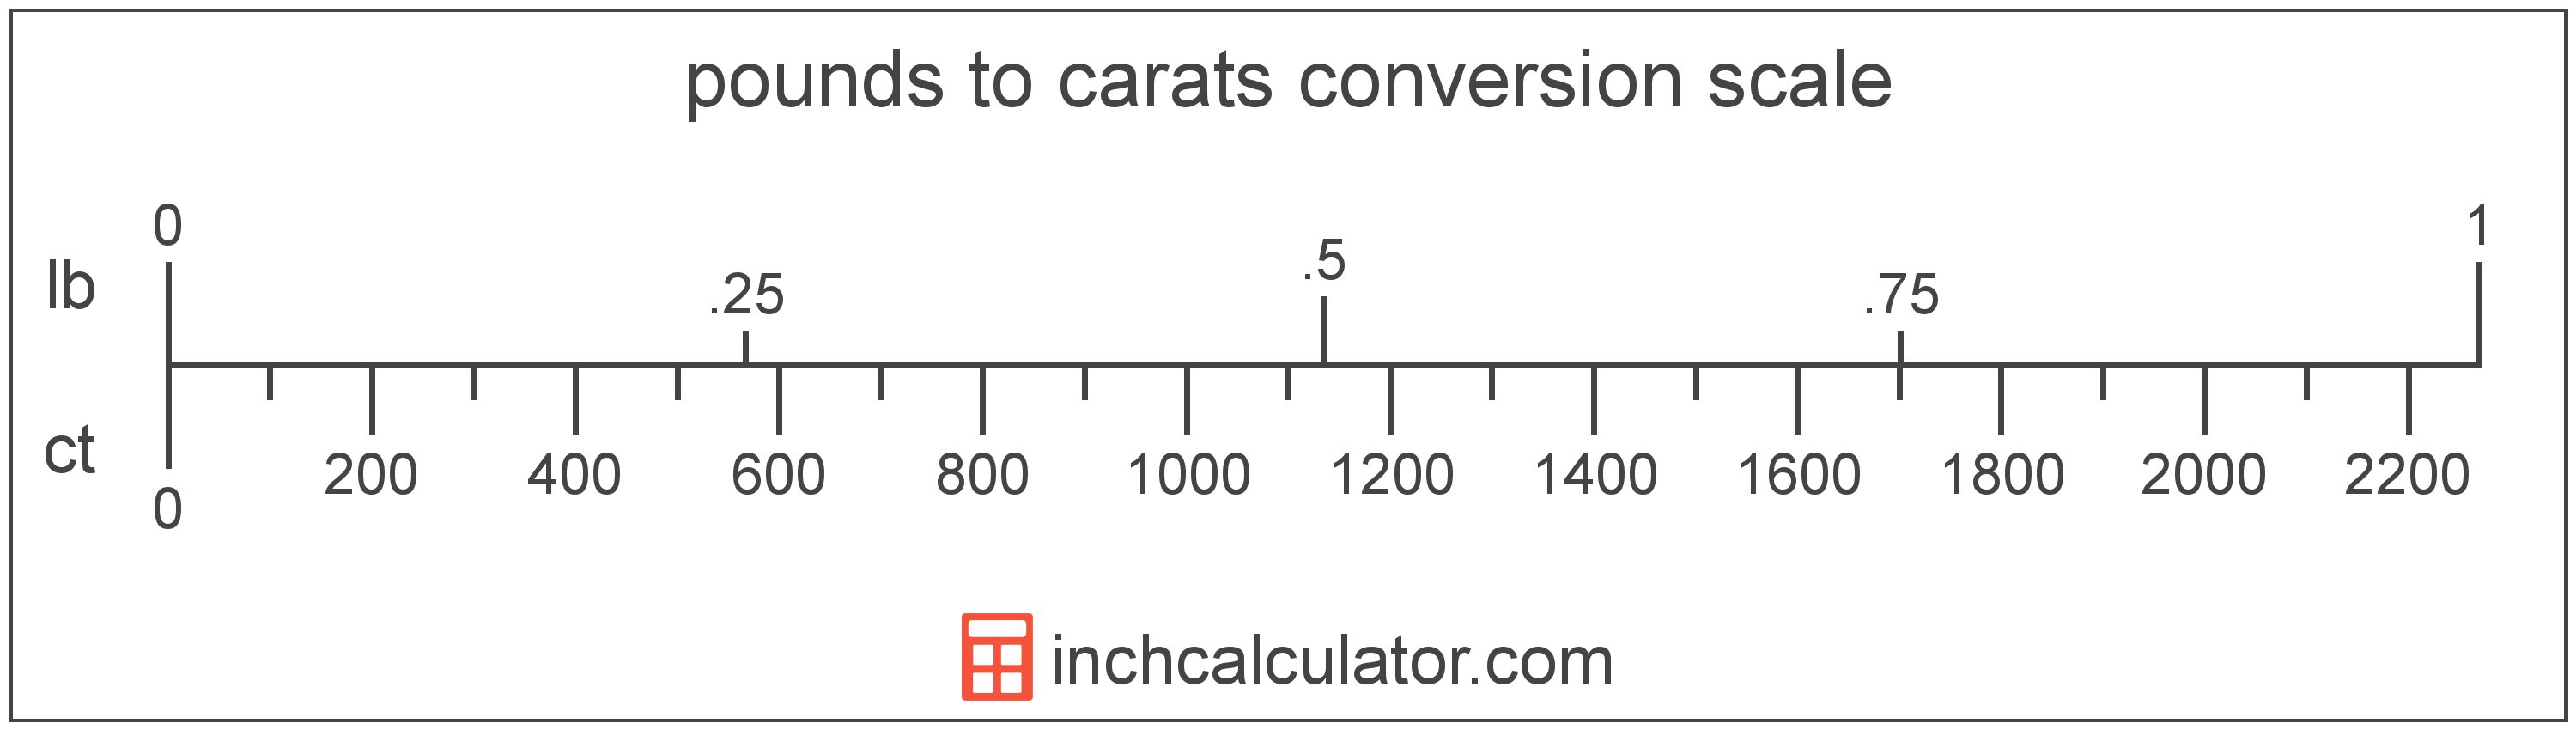 conversion scale showing carats and equivalent pounds weight values